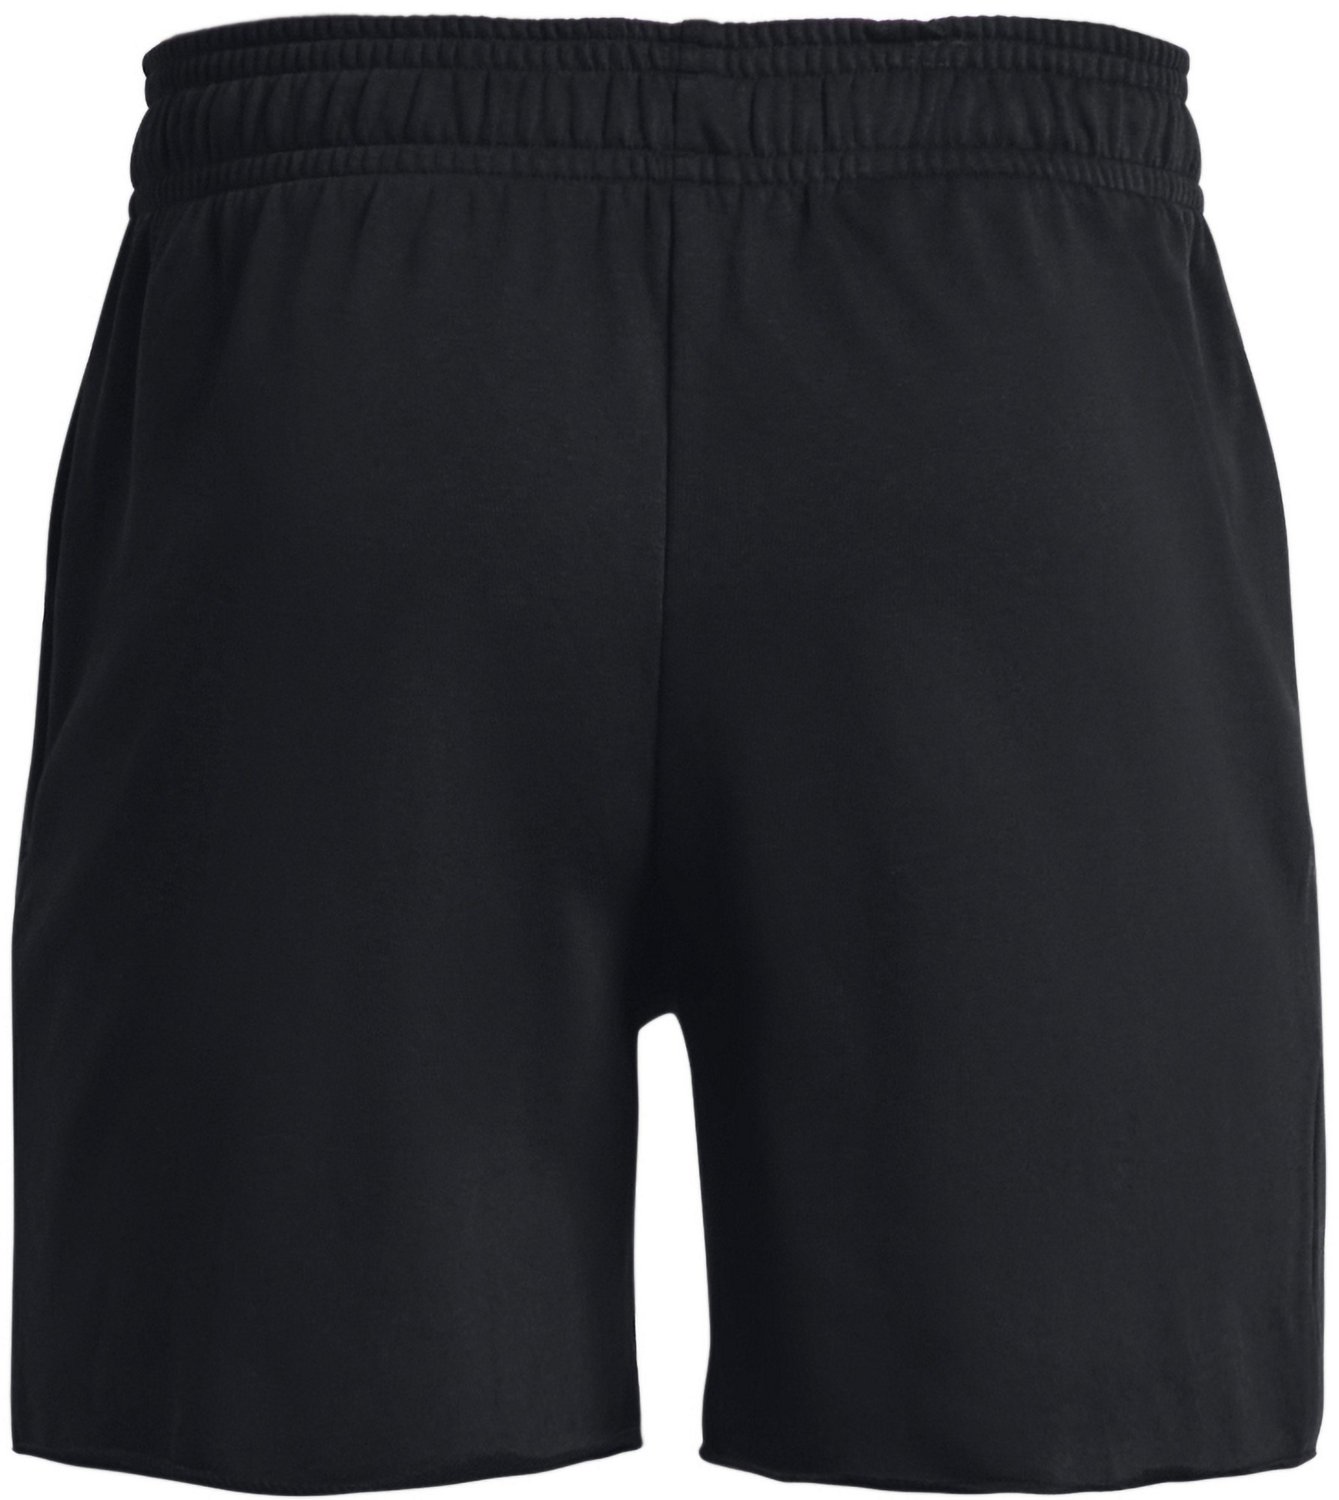 Under Armour Men's Rival Terry Shorts 6 in